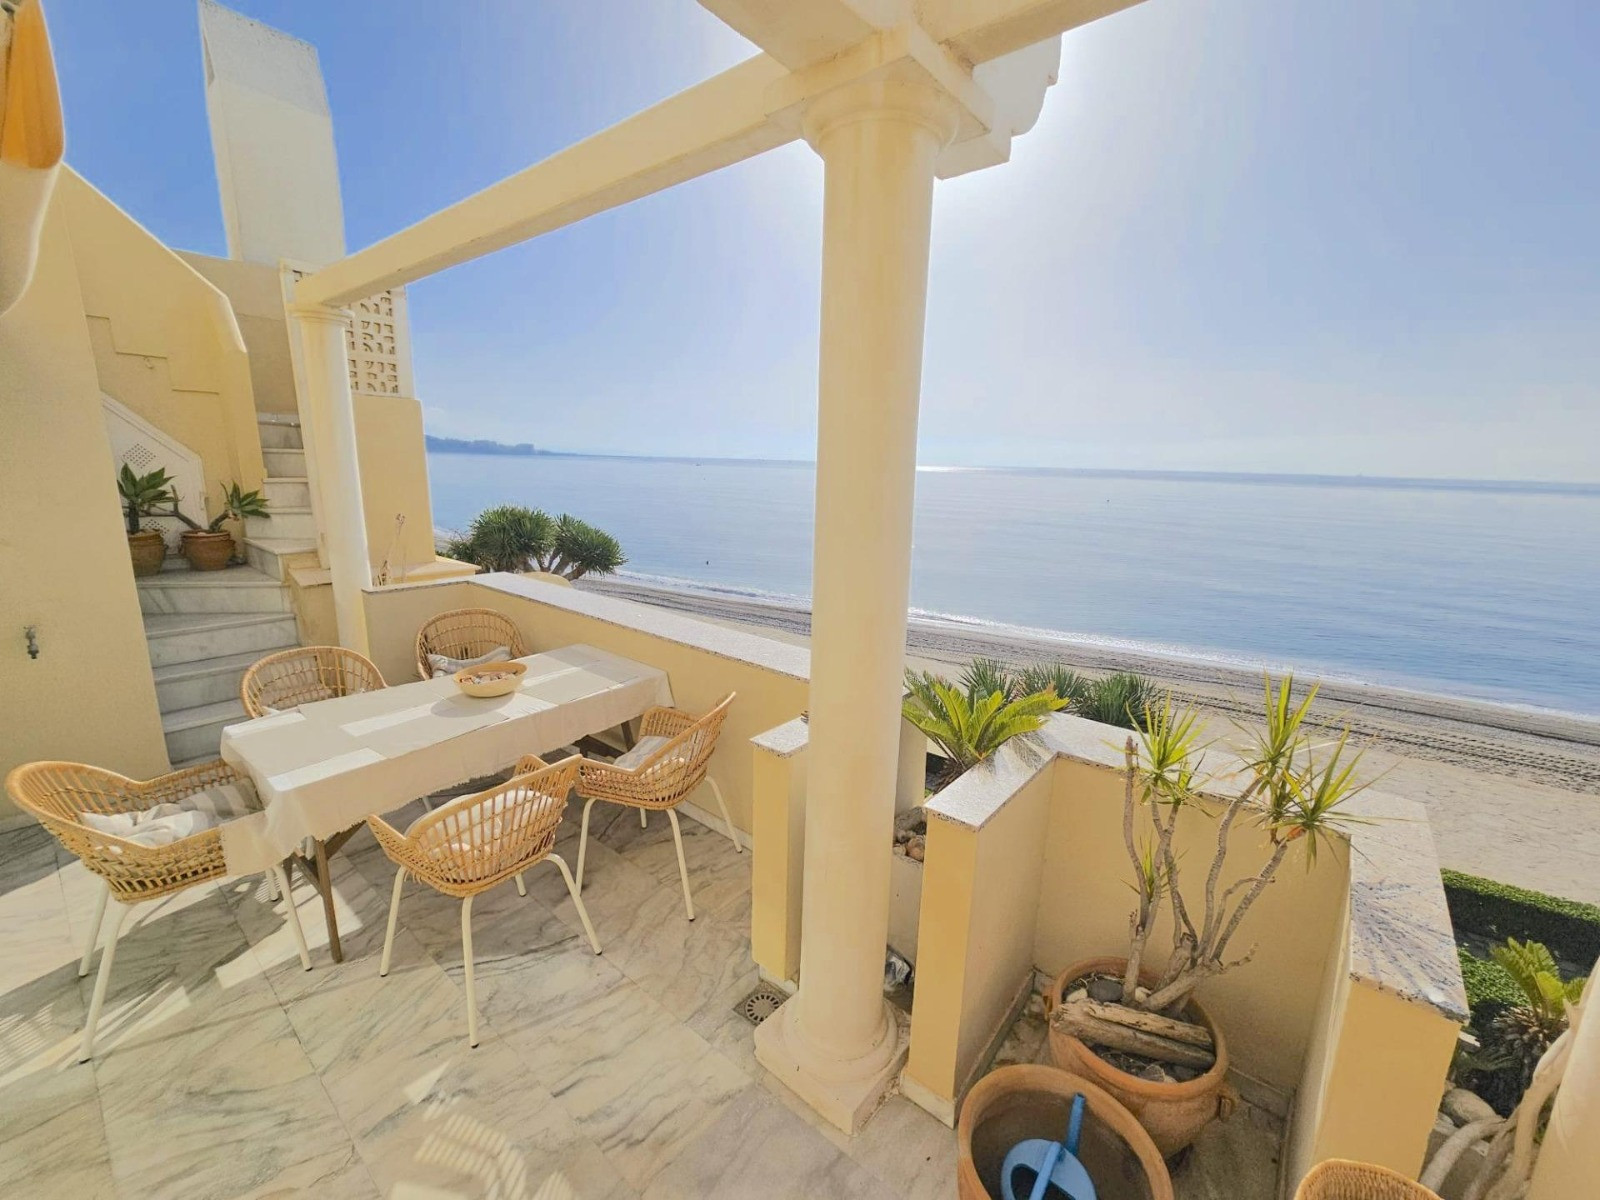 Fantastic beachfront penthouse with stunning sea views, just minutes from Estepona